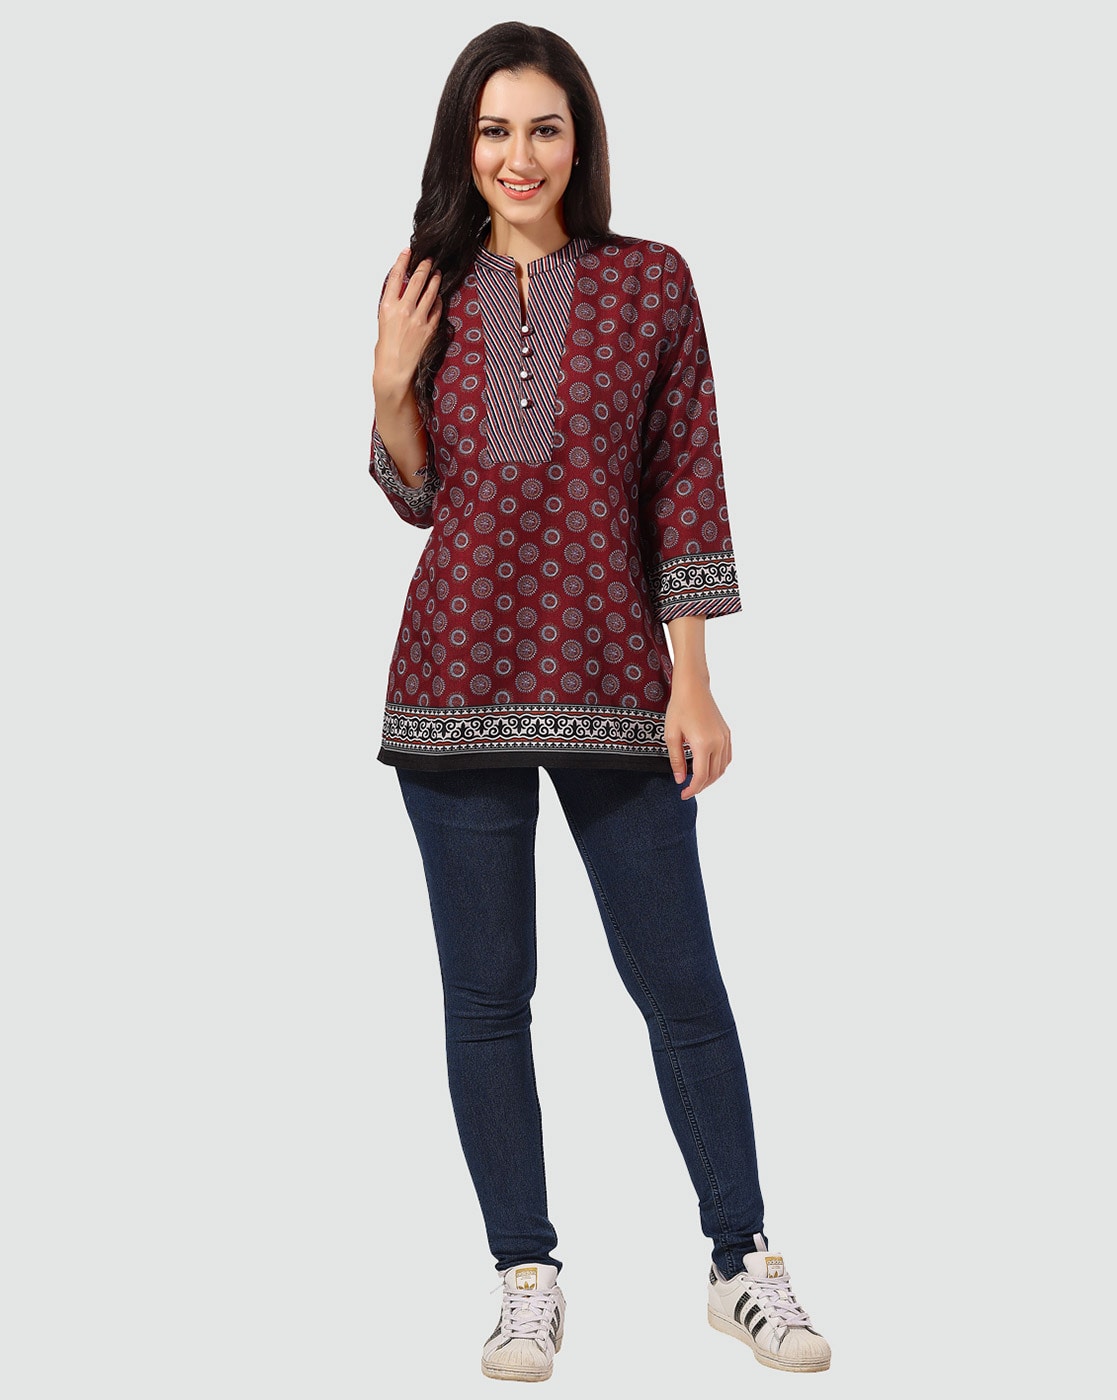 Share more than 148 short kurti and jeans photos